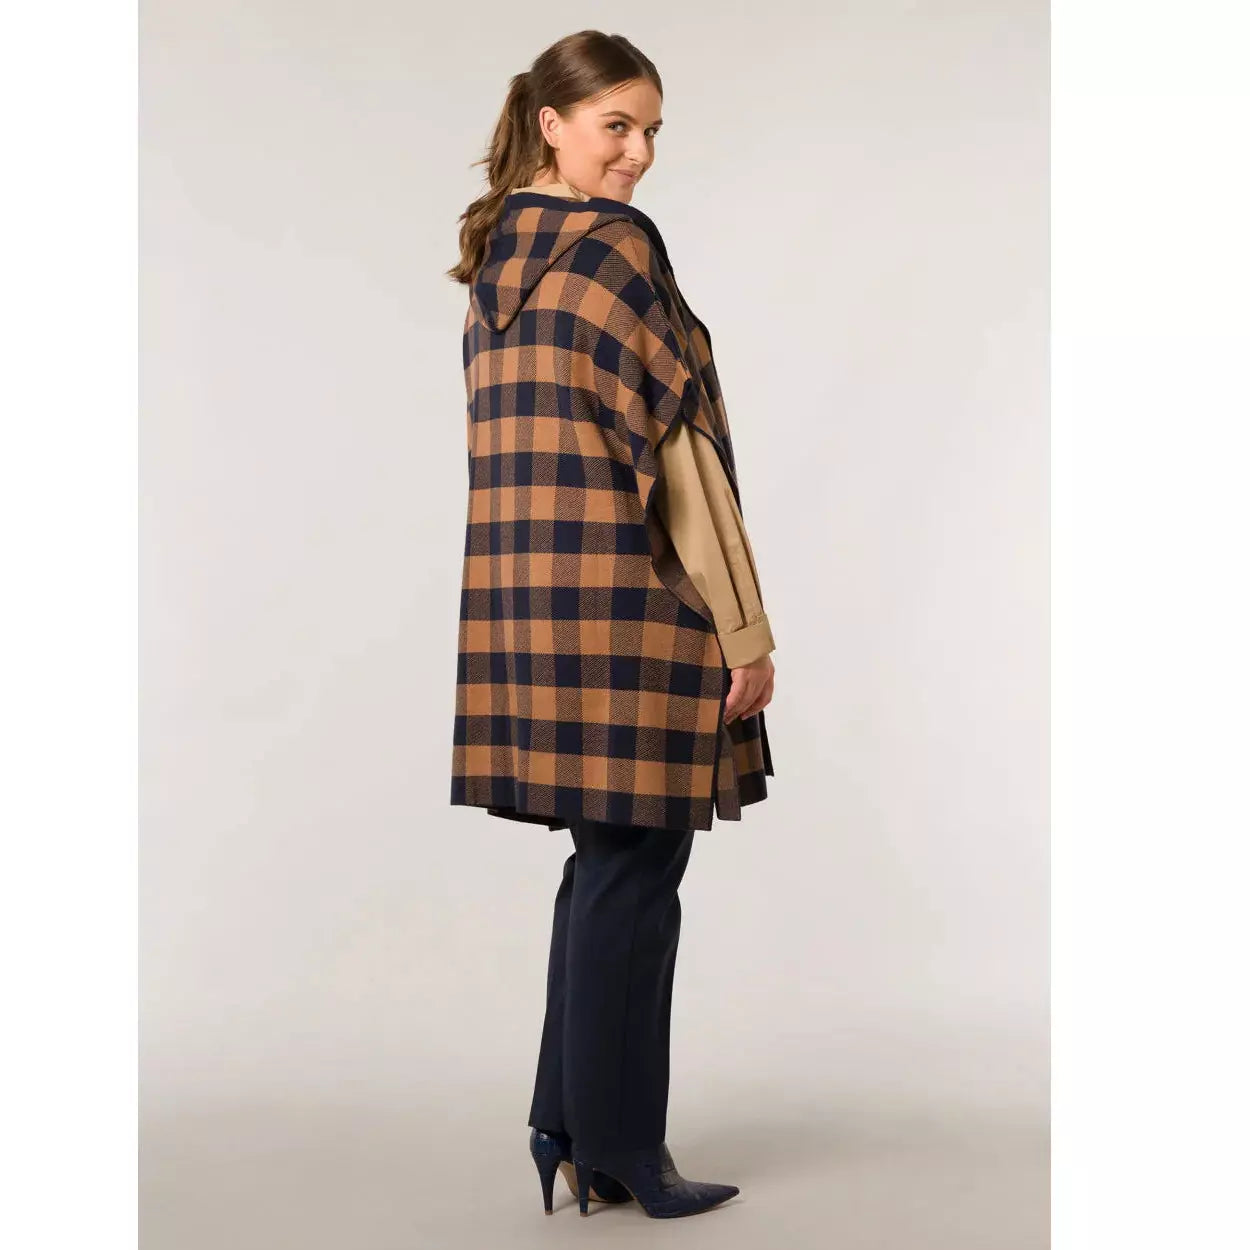 Fall Style Plaid -Hooded Coverup/Cardigan Plus size